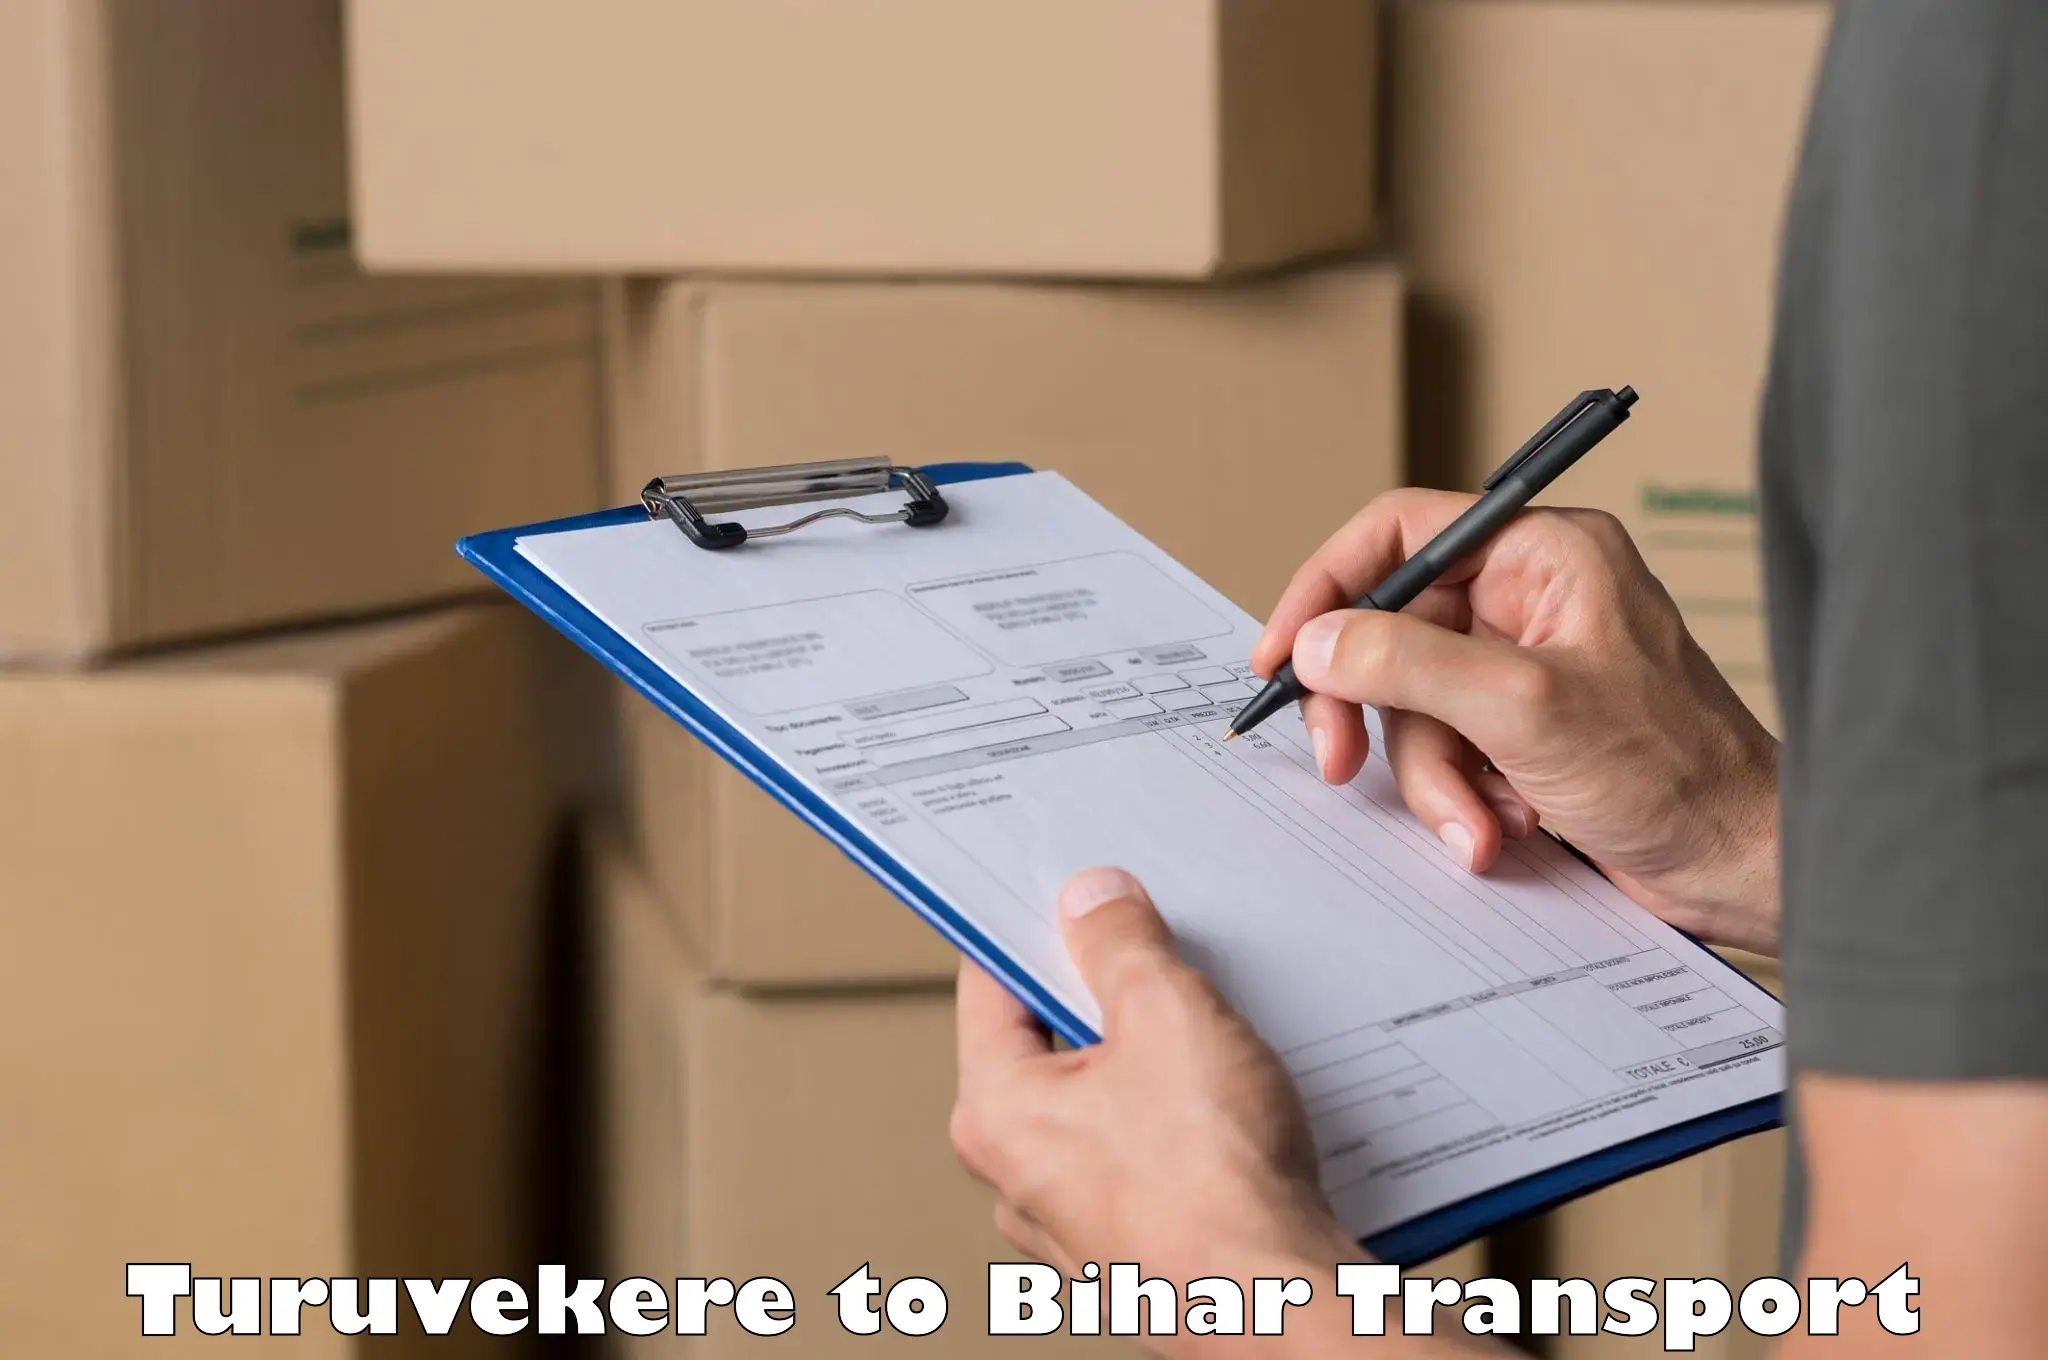 Road transport online services Turuvekere to Dehri